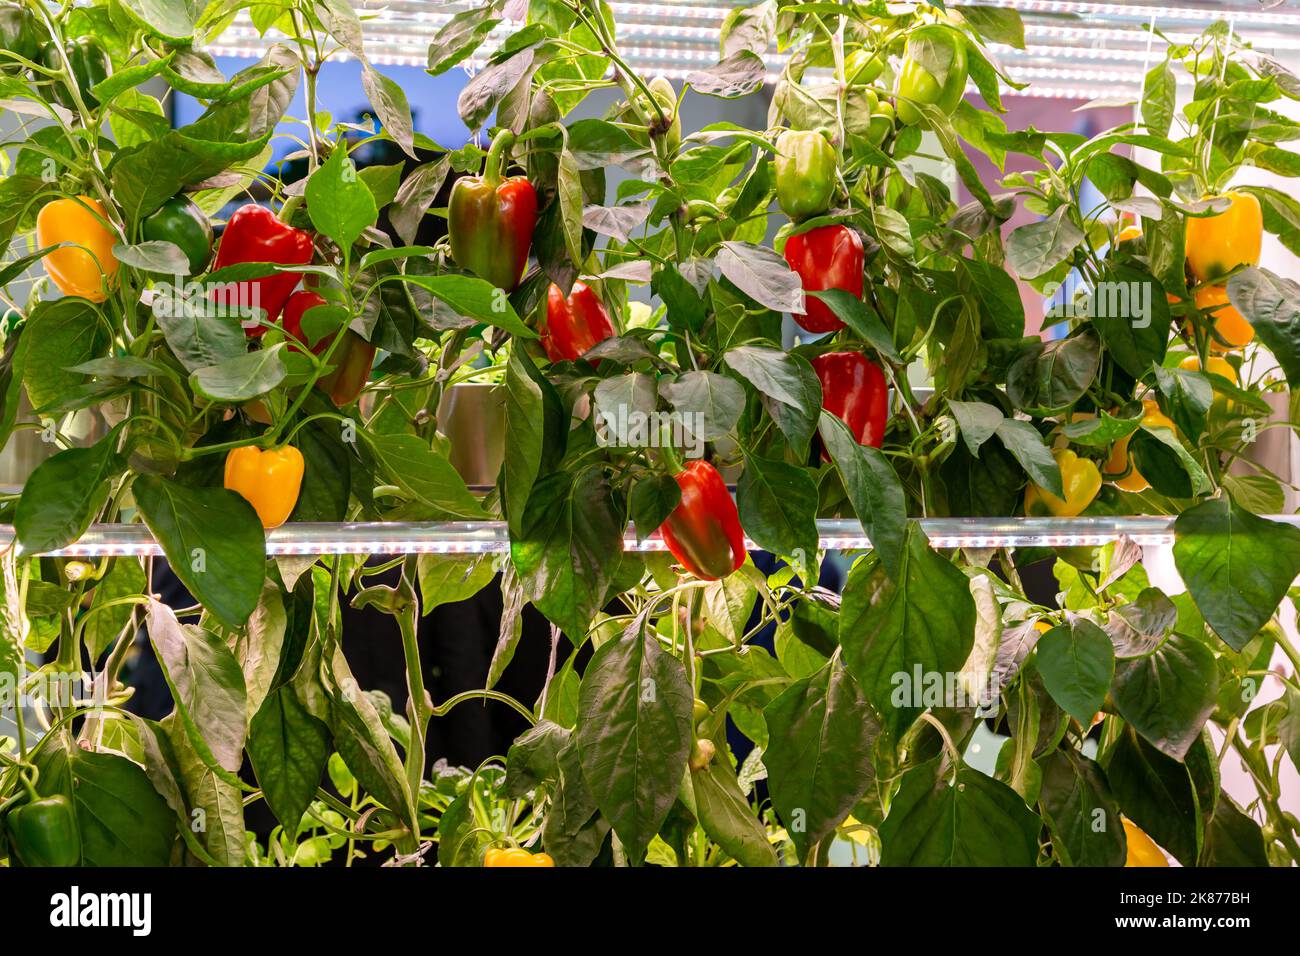 Growing peppers hydroponically under phytolamps Stock Photo